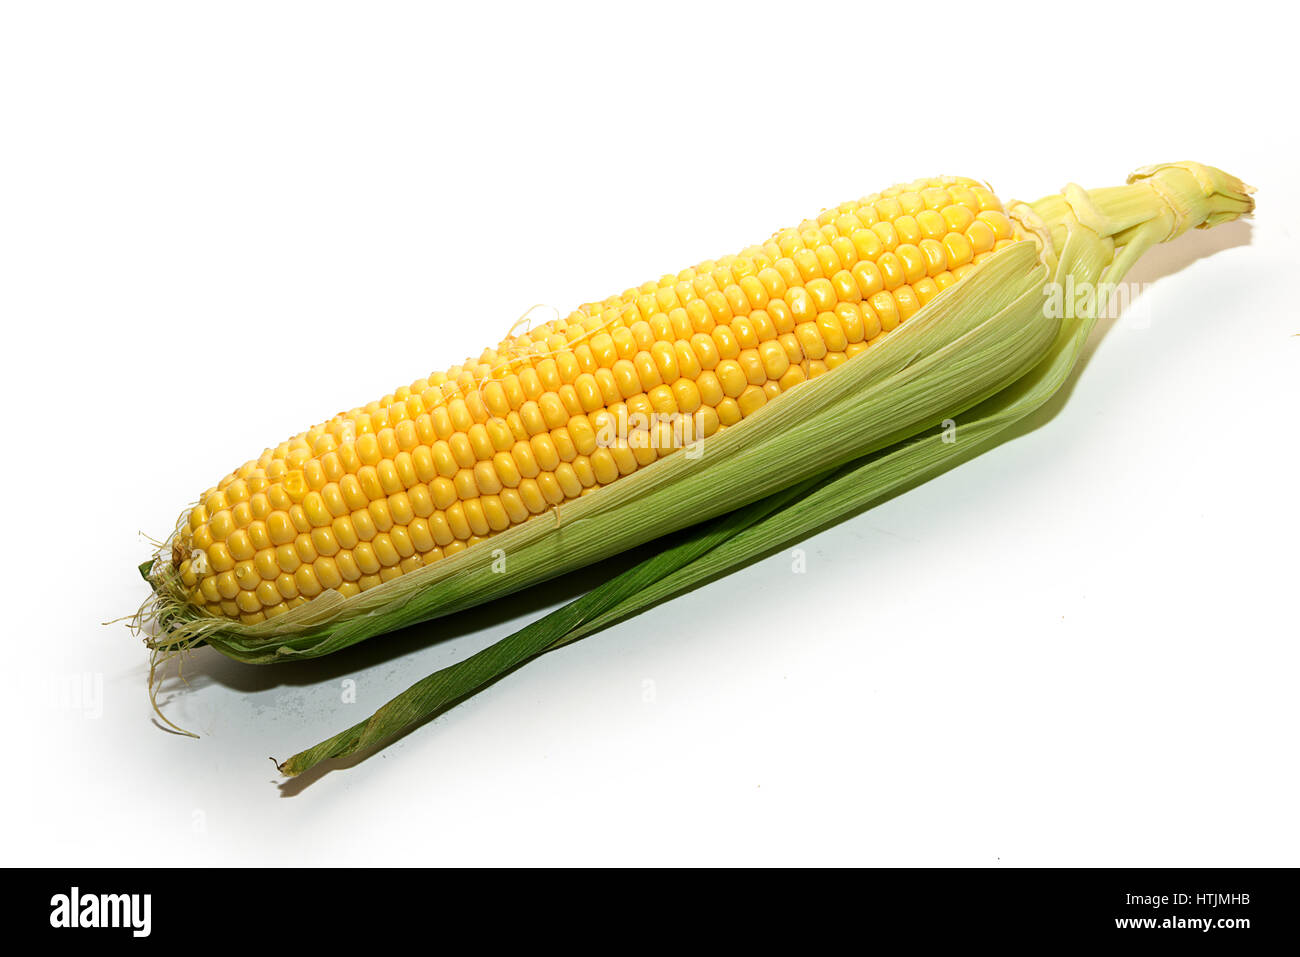 The fruits of ripe yellow corn are on the table Stock Photo